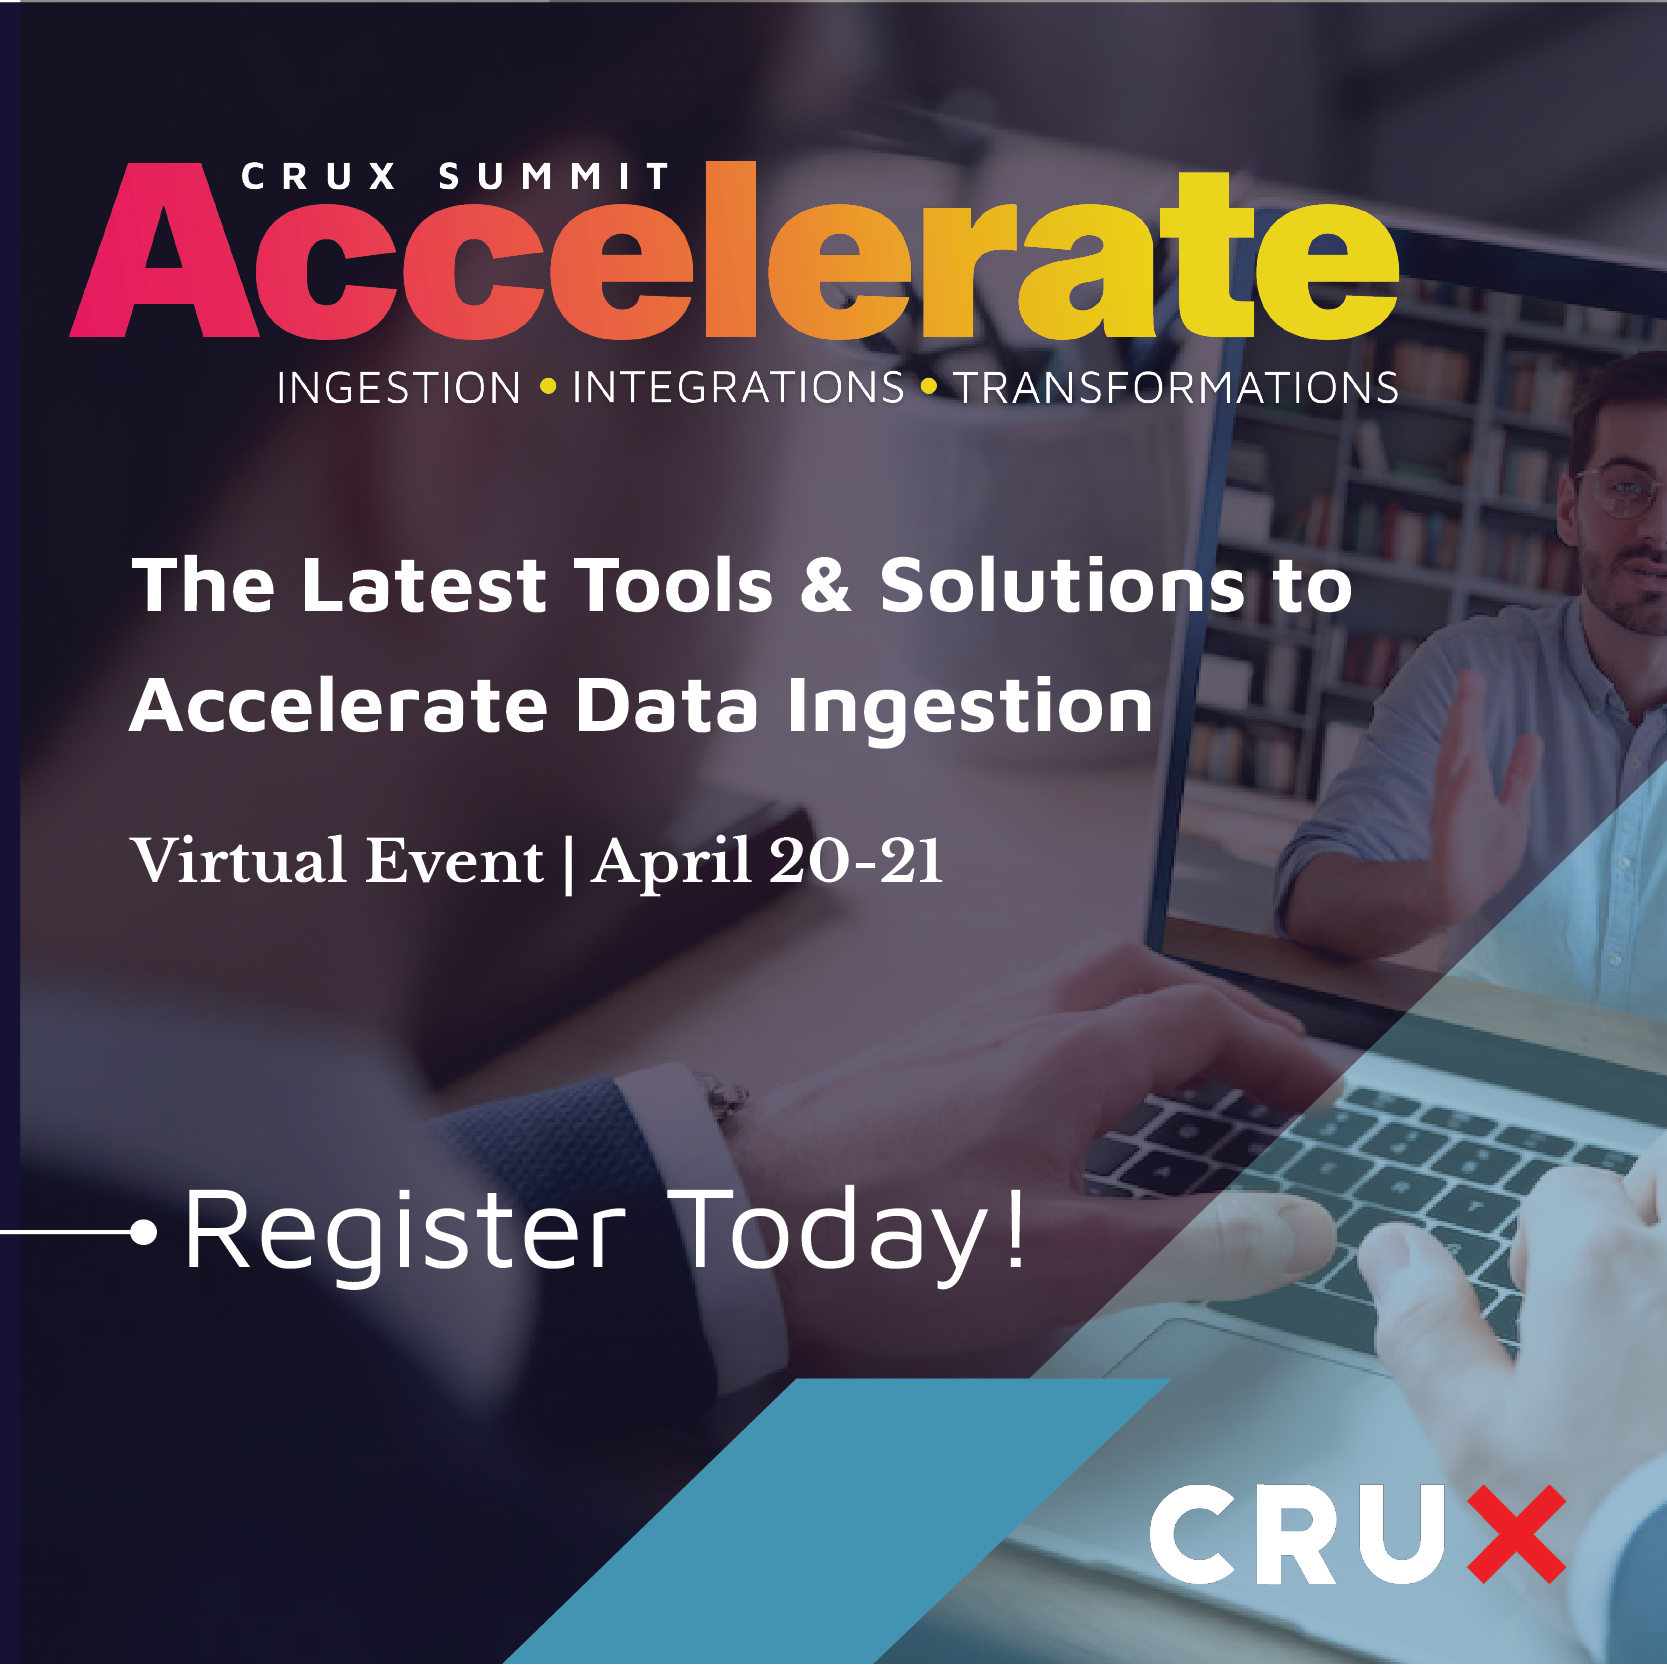 Accelerate Summit | Hosted by Crux Informatics